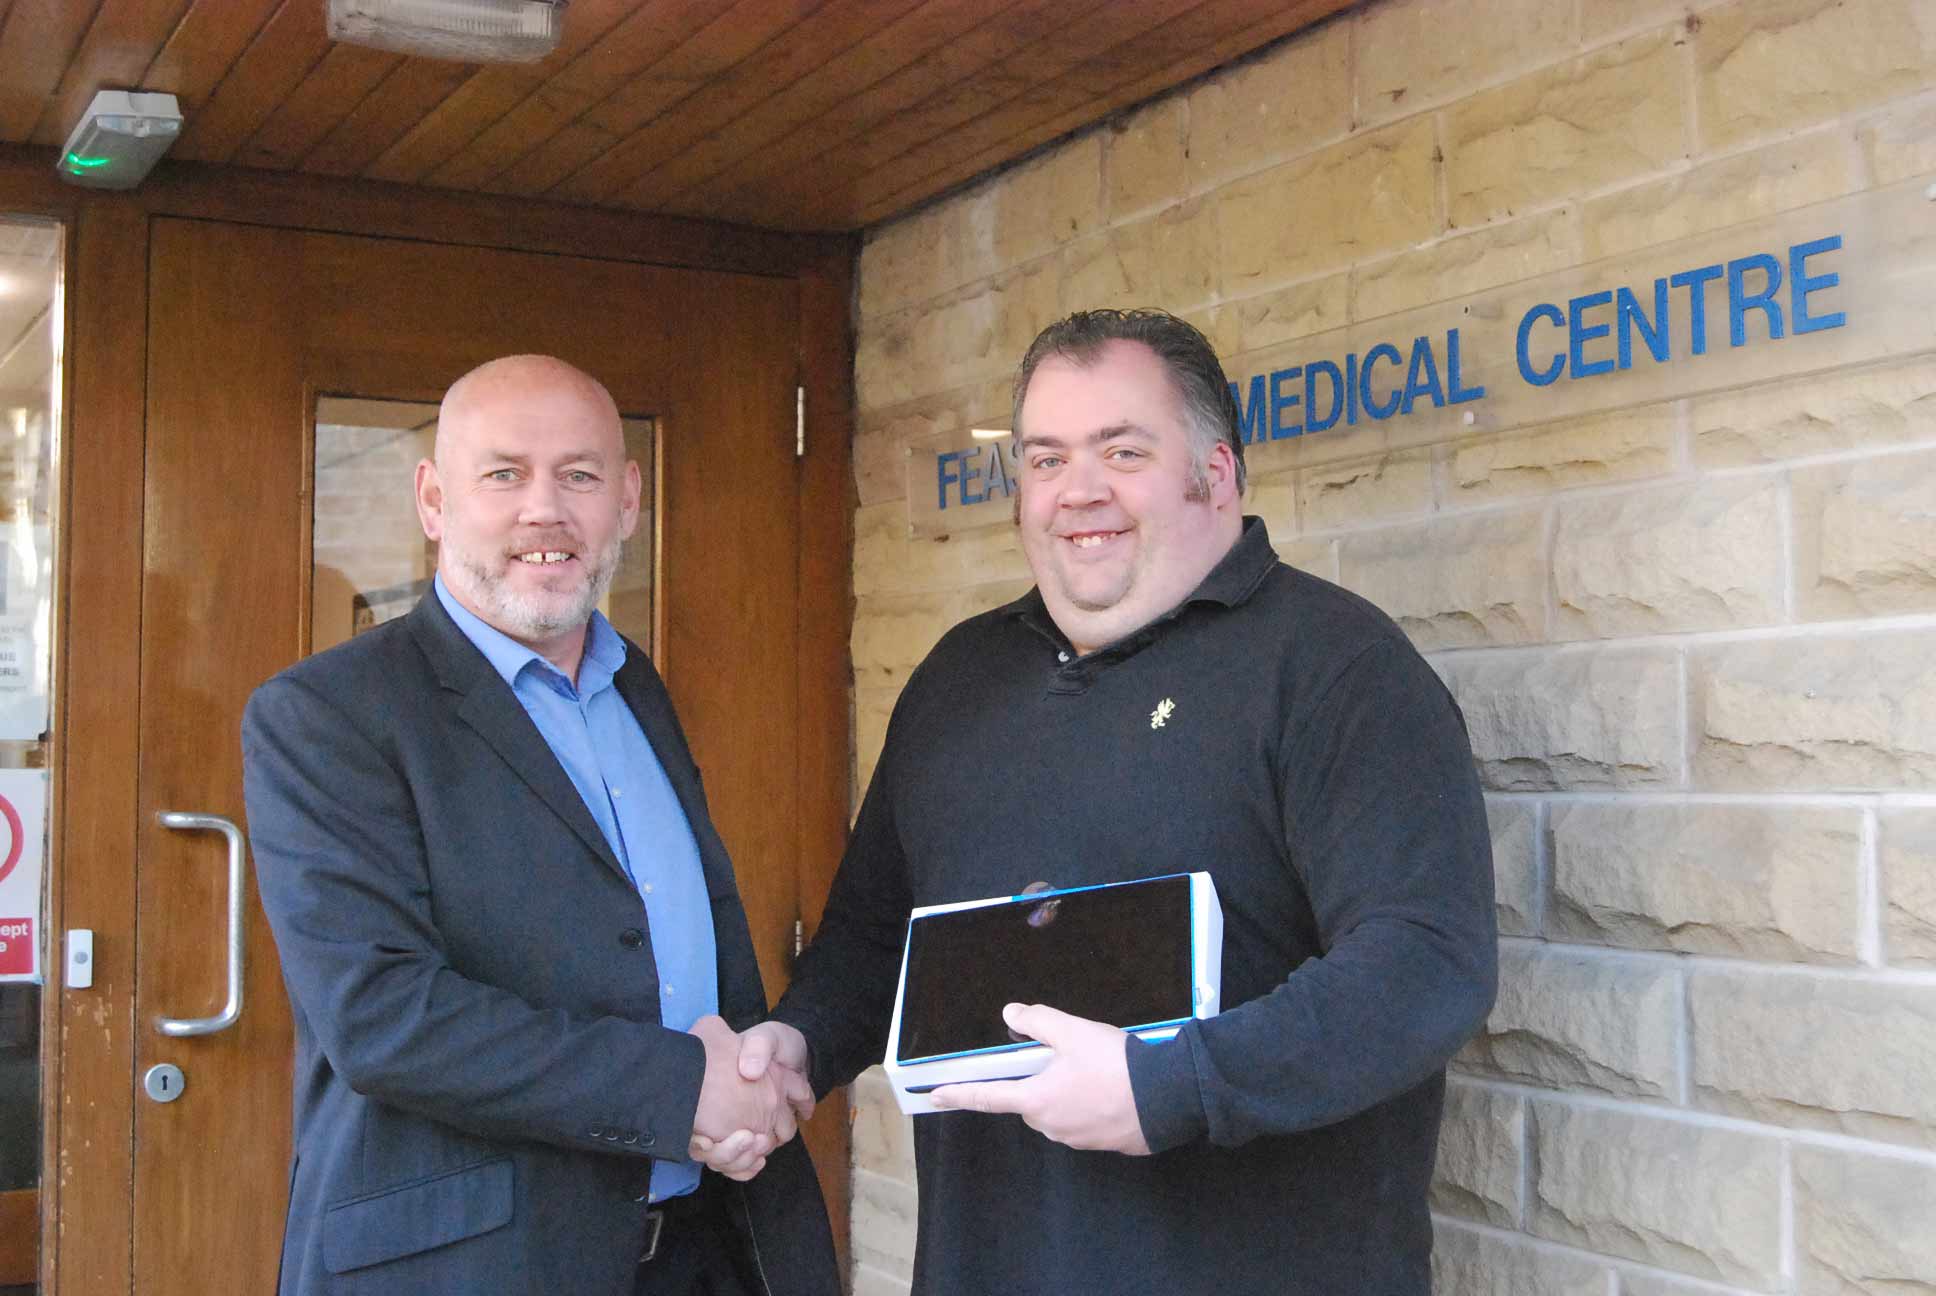 Pateley Bridge town councillor Antony Brown has received a tablet of a different kind in a prize draw run by a local consortium of doctors